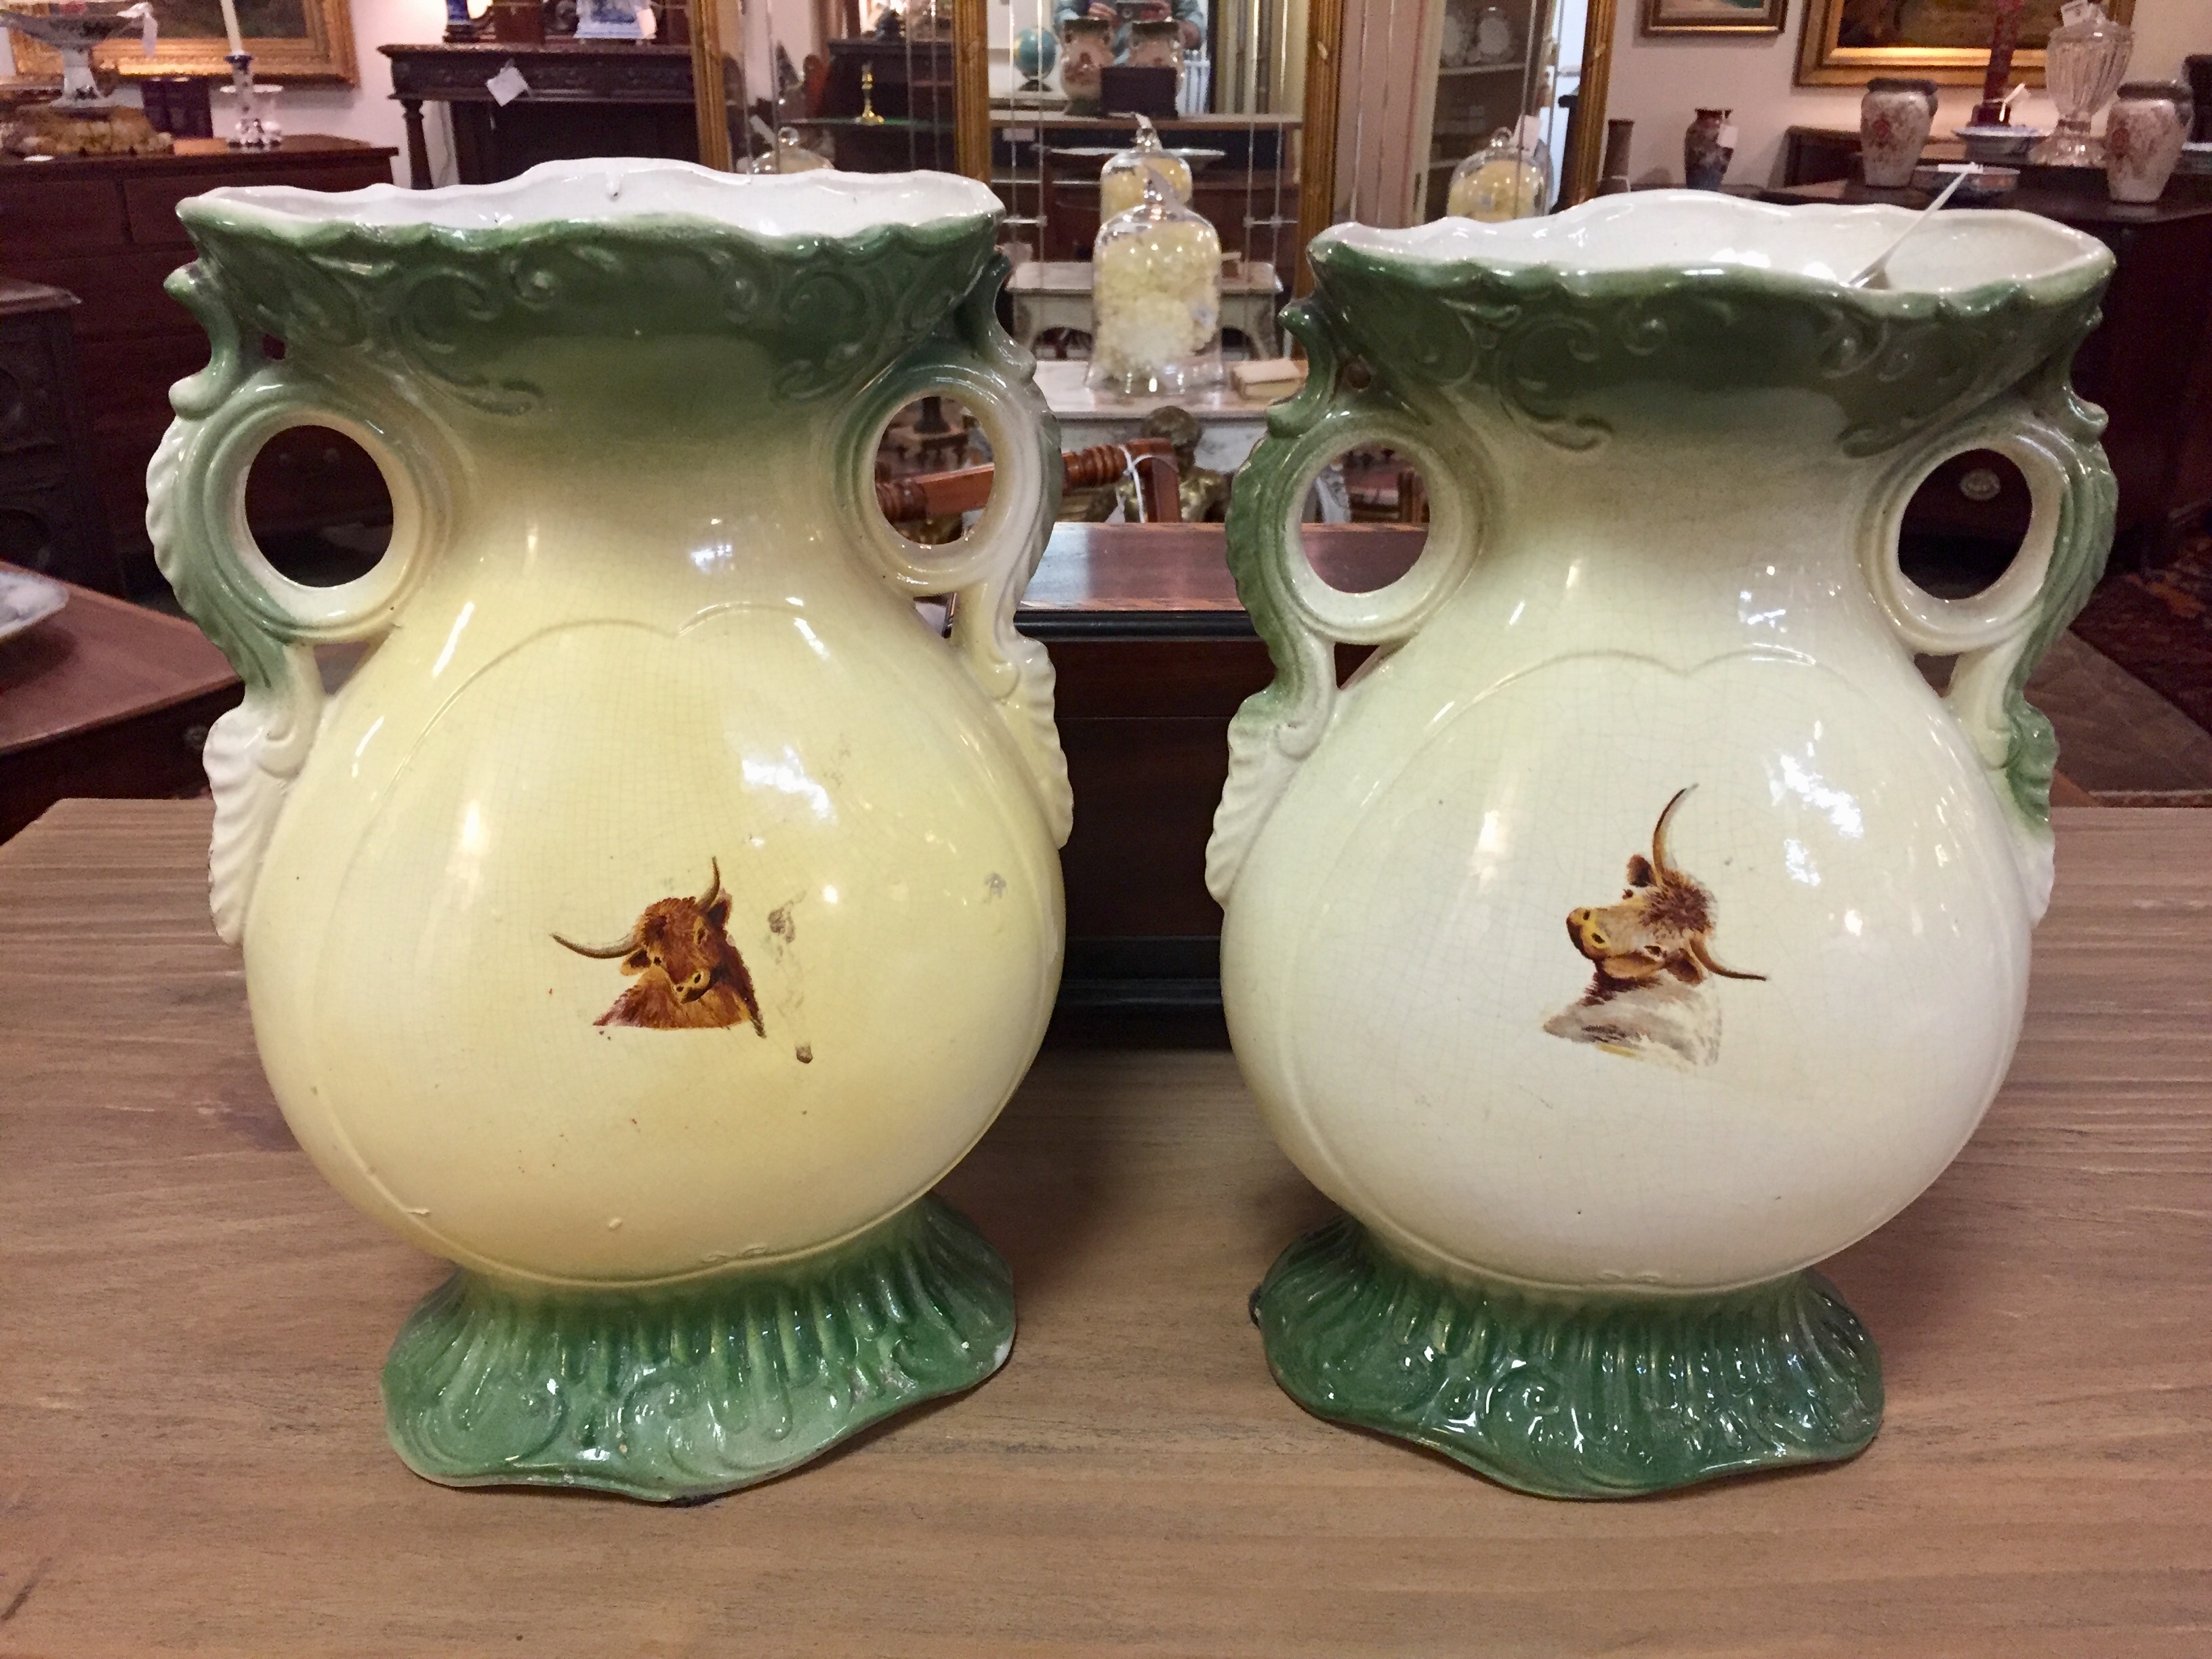 A Pair of Double Handled Porcelain Vases with Cow Decorations  (SOLD)